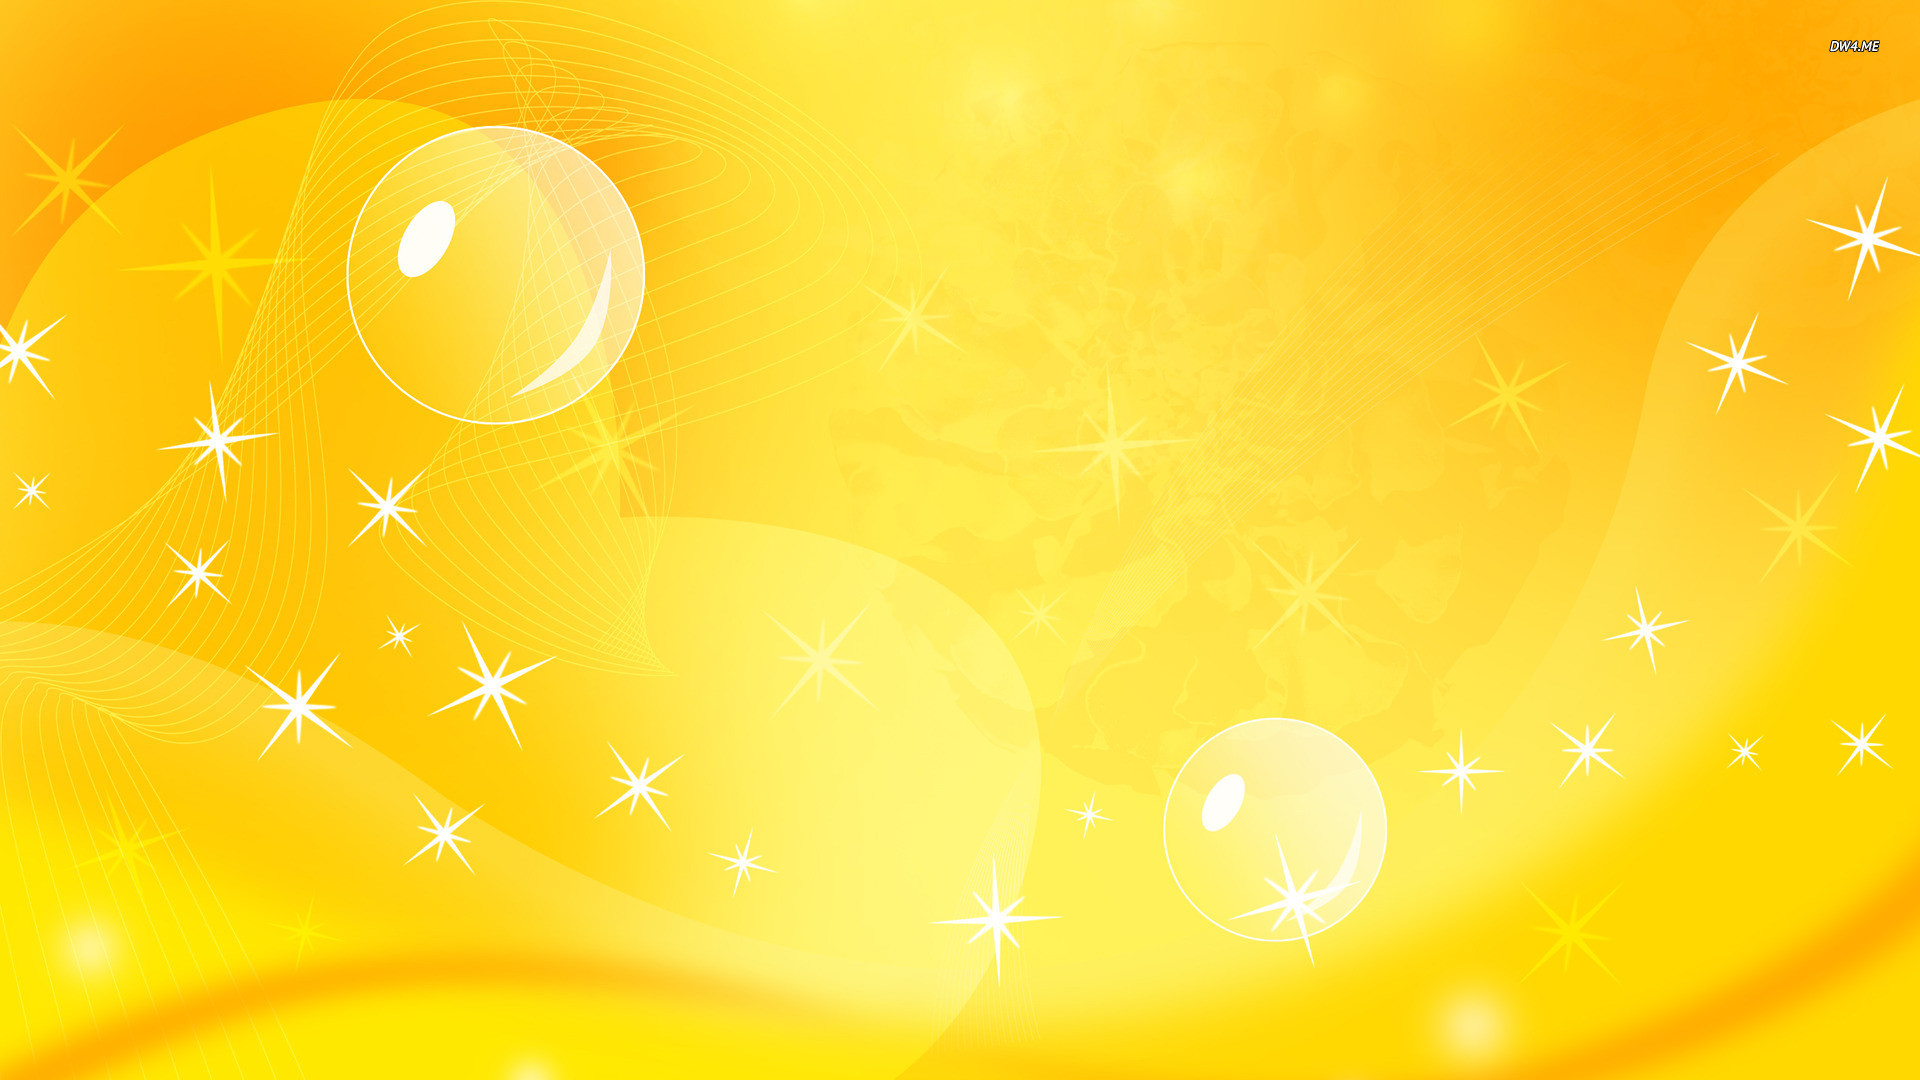 1920x1080 Yellow curves wallpaper - Abstract wallpapers - #833